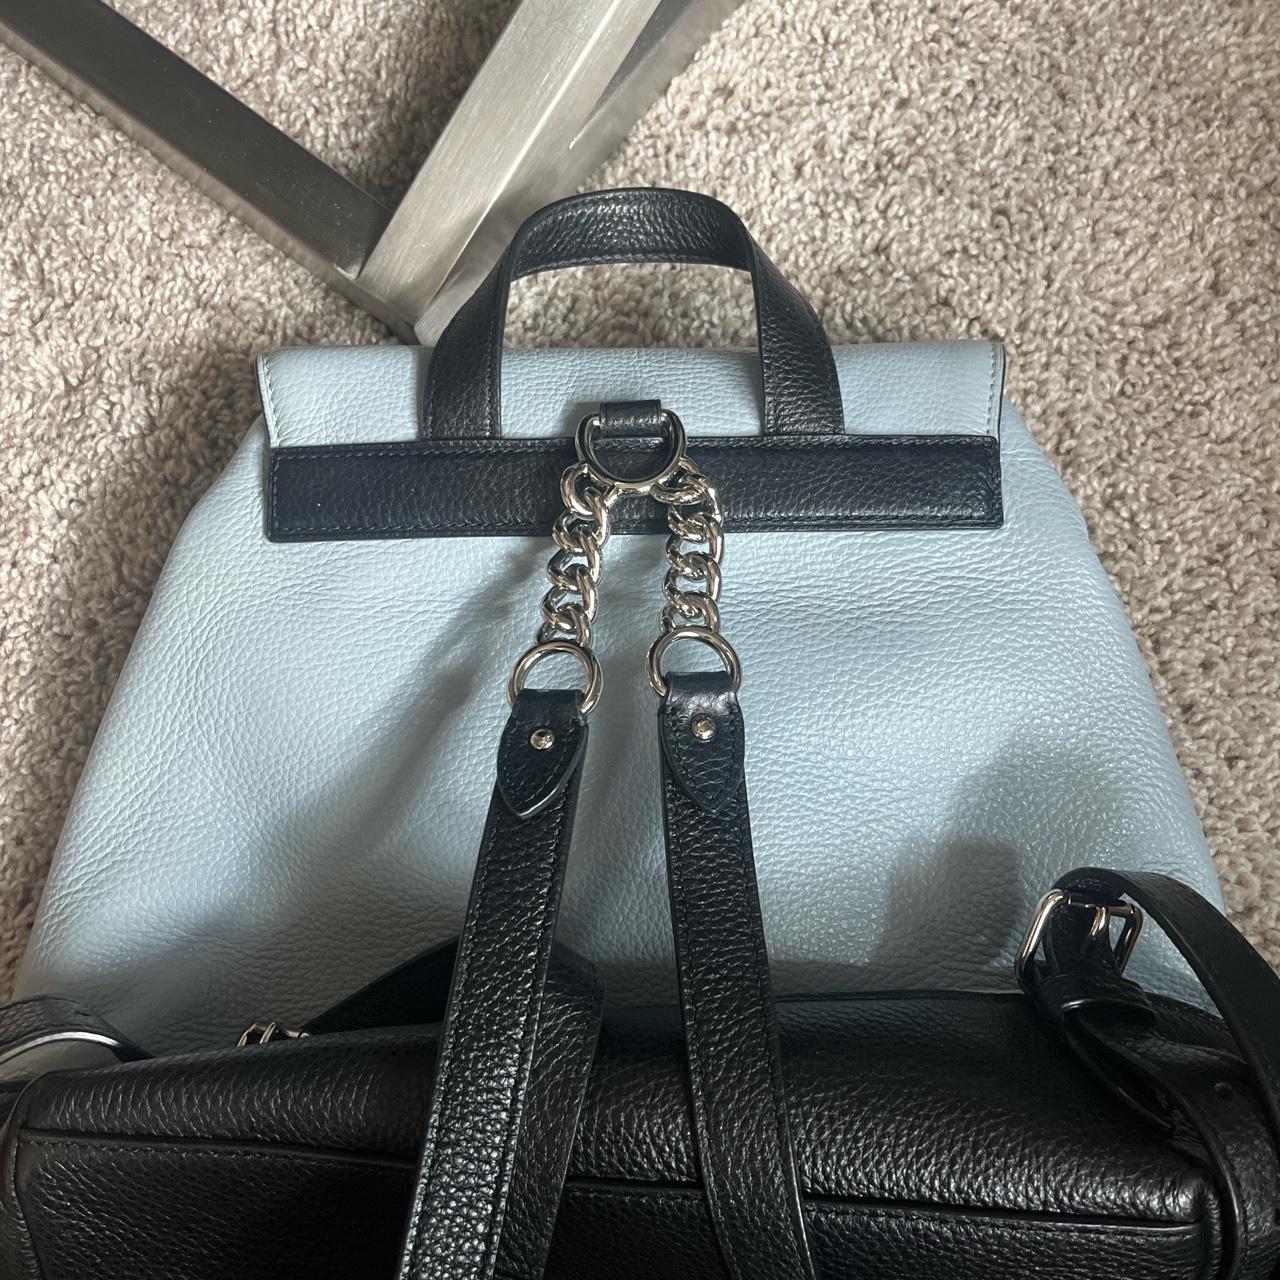 Adorable Baby Blue Coach Backpack! Barely used... - Depop